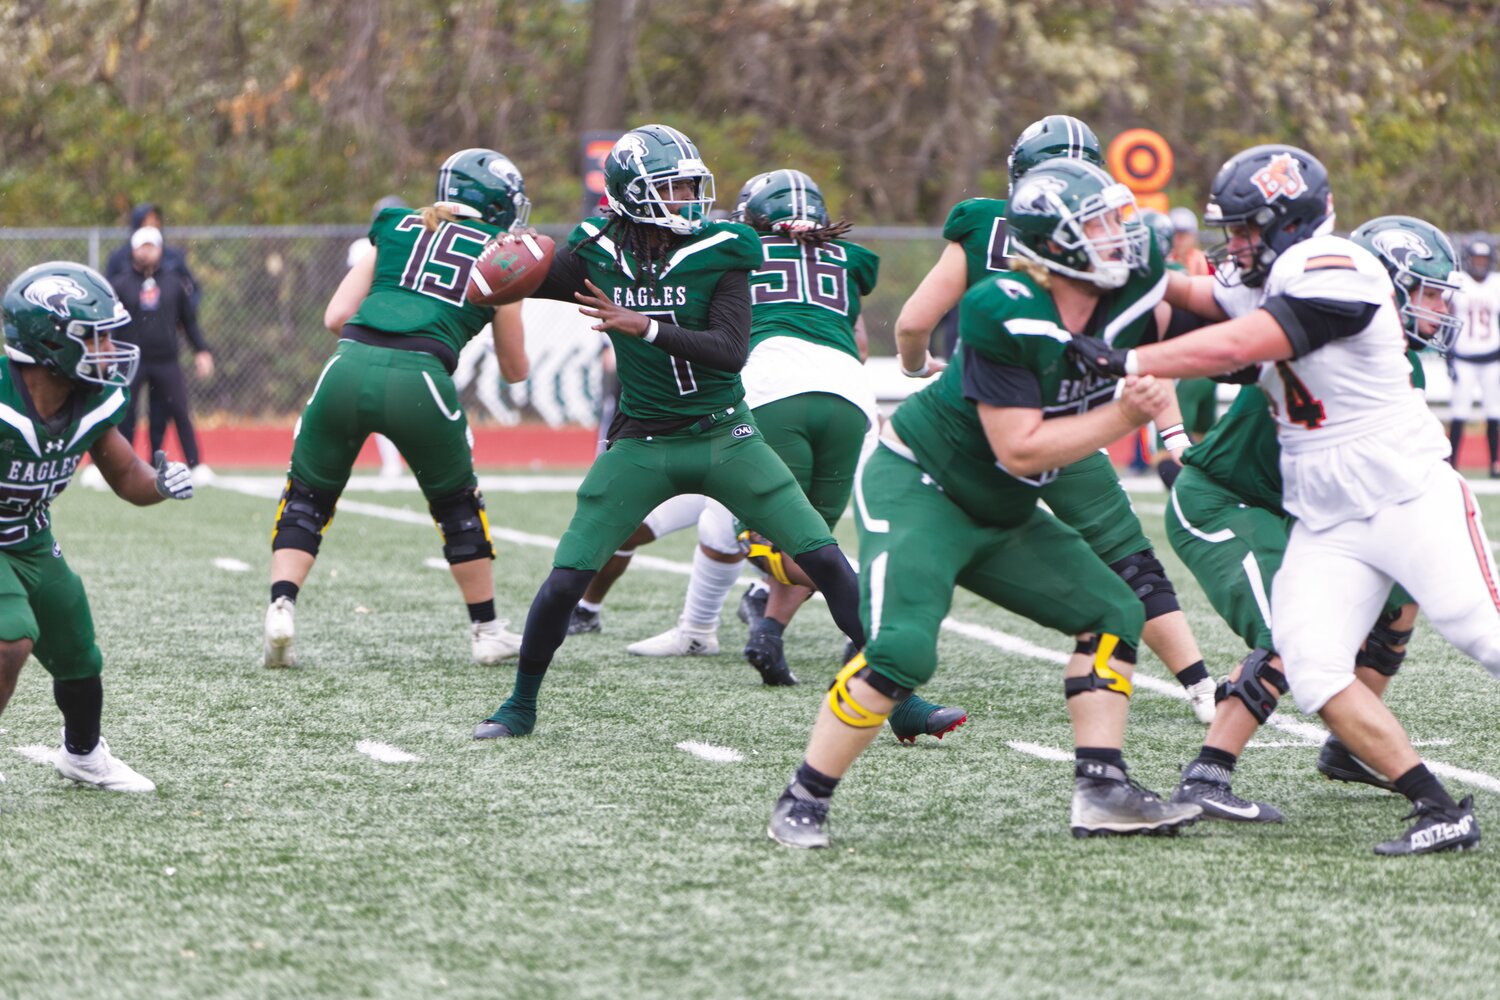 Central Methodist quarterback Joe Cambridge passed for 297 yards and three touchdowns in his final game on Saturday.